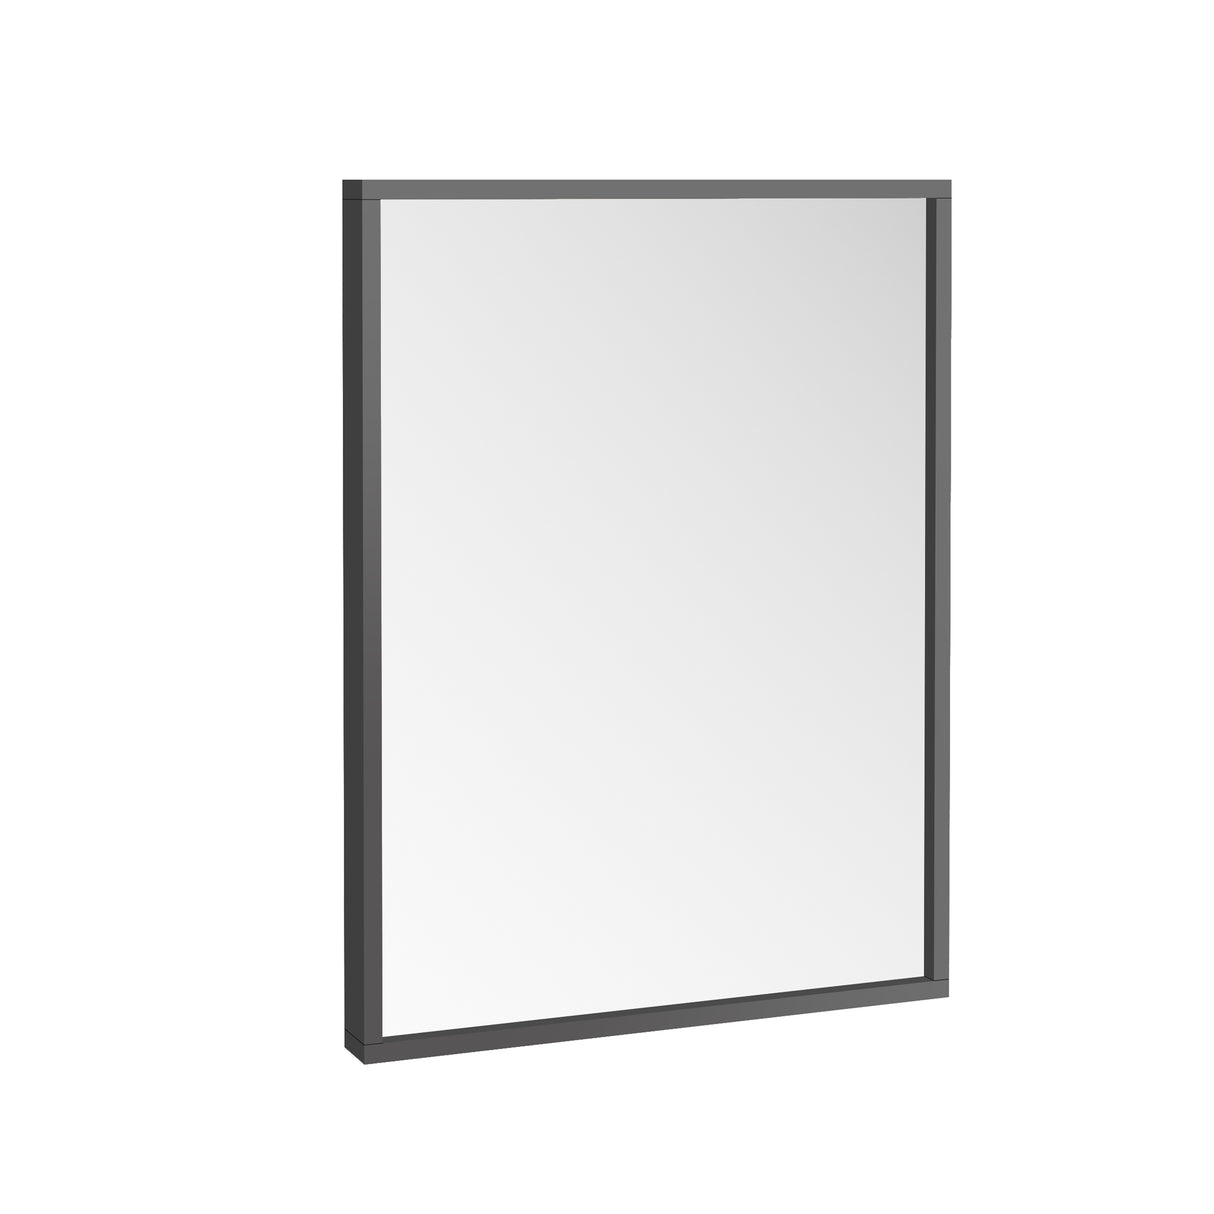 Mirror 800mm x 600mm - 4 COLOURS !